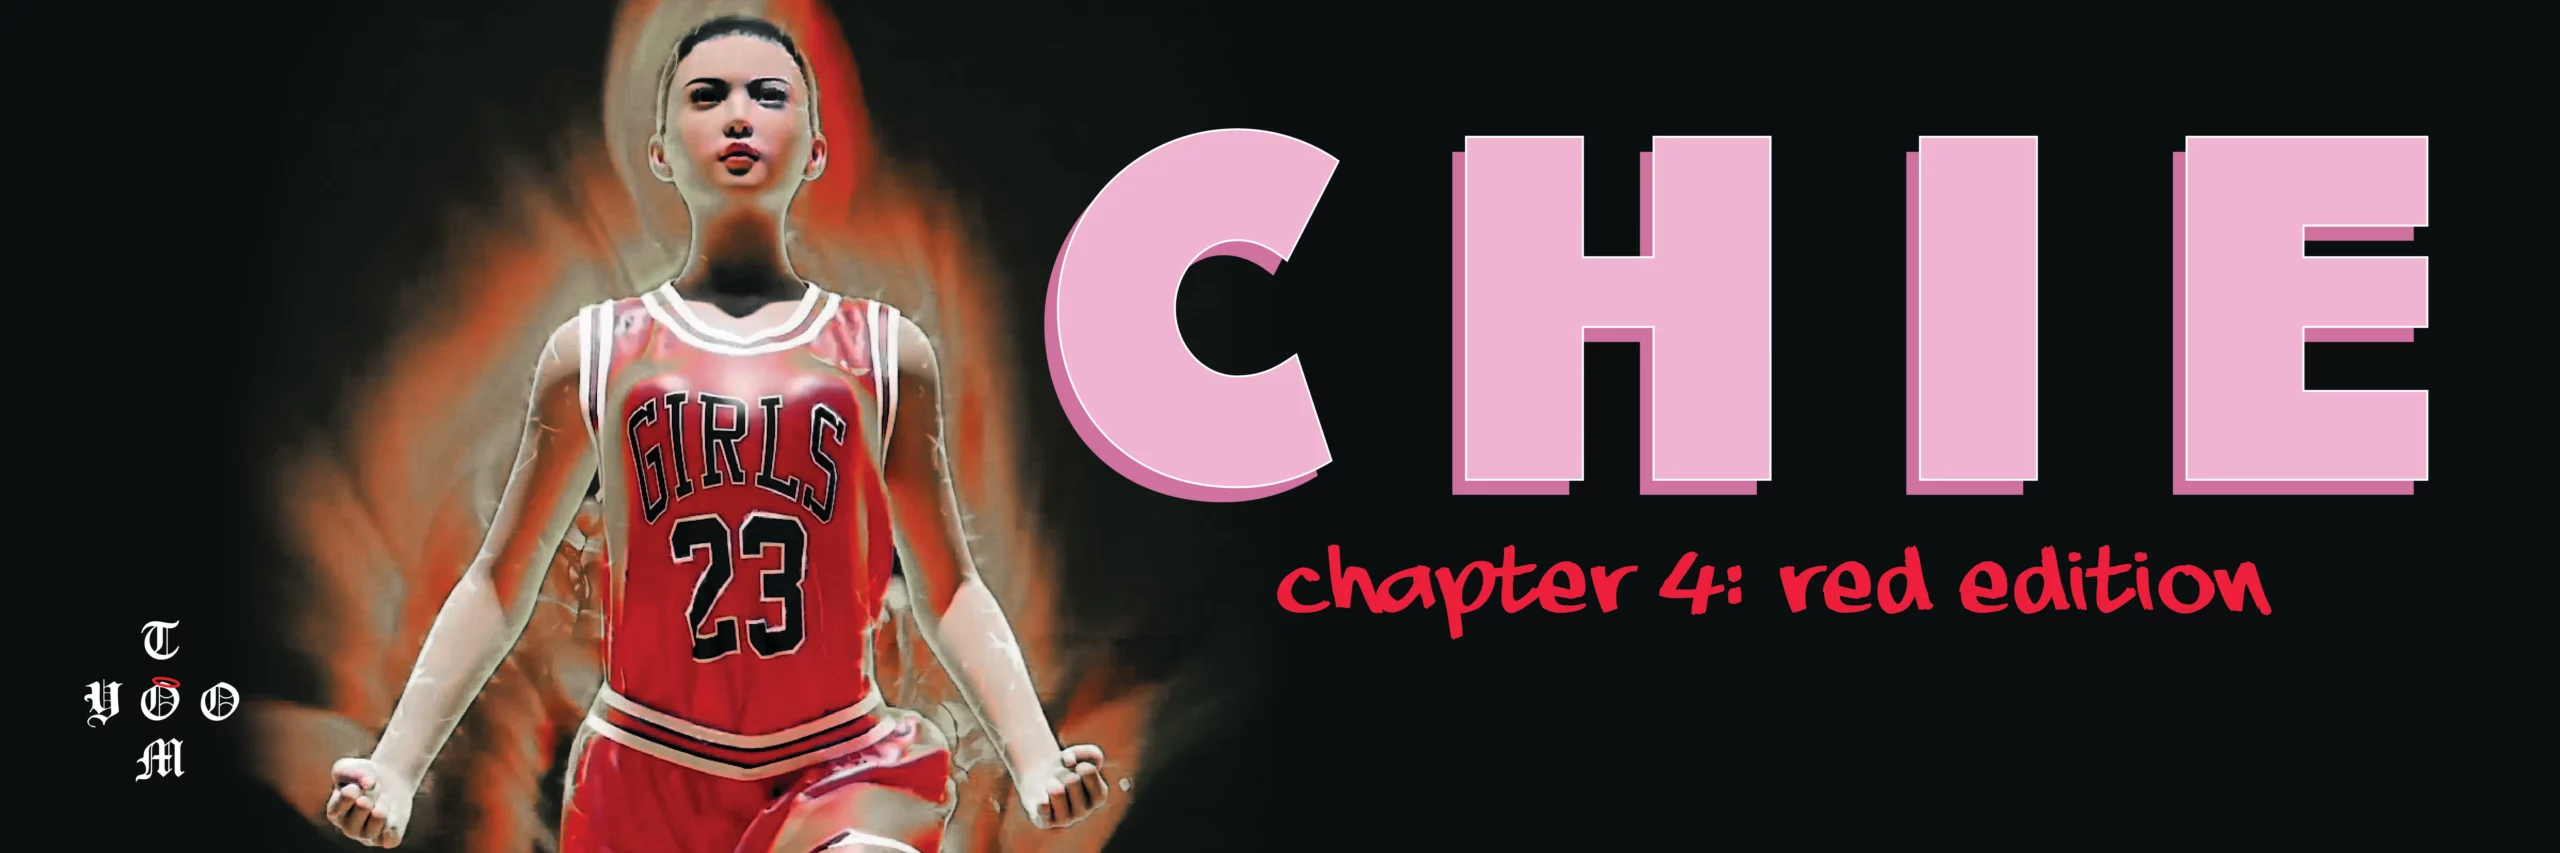 Tom Yoo Presents: CHIE chapter 4